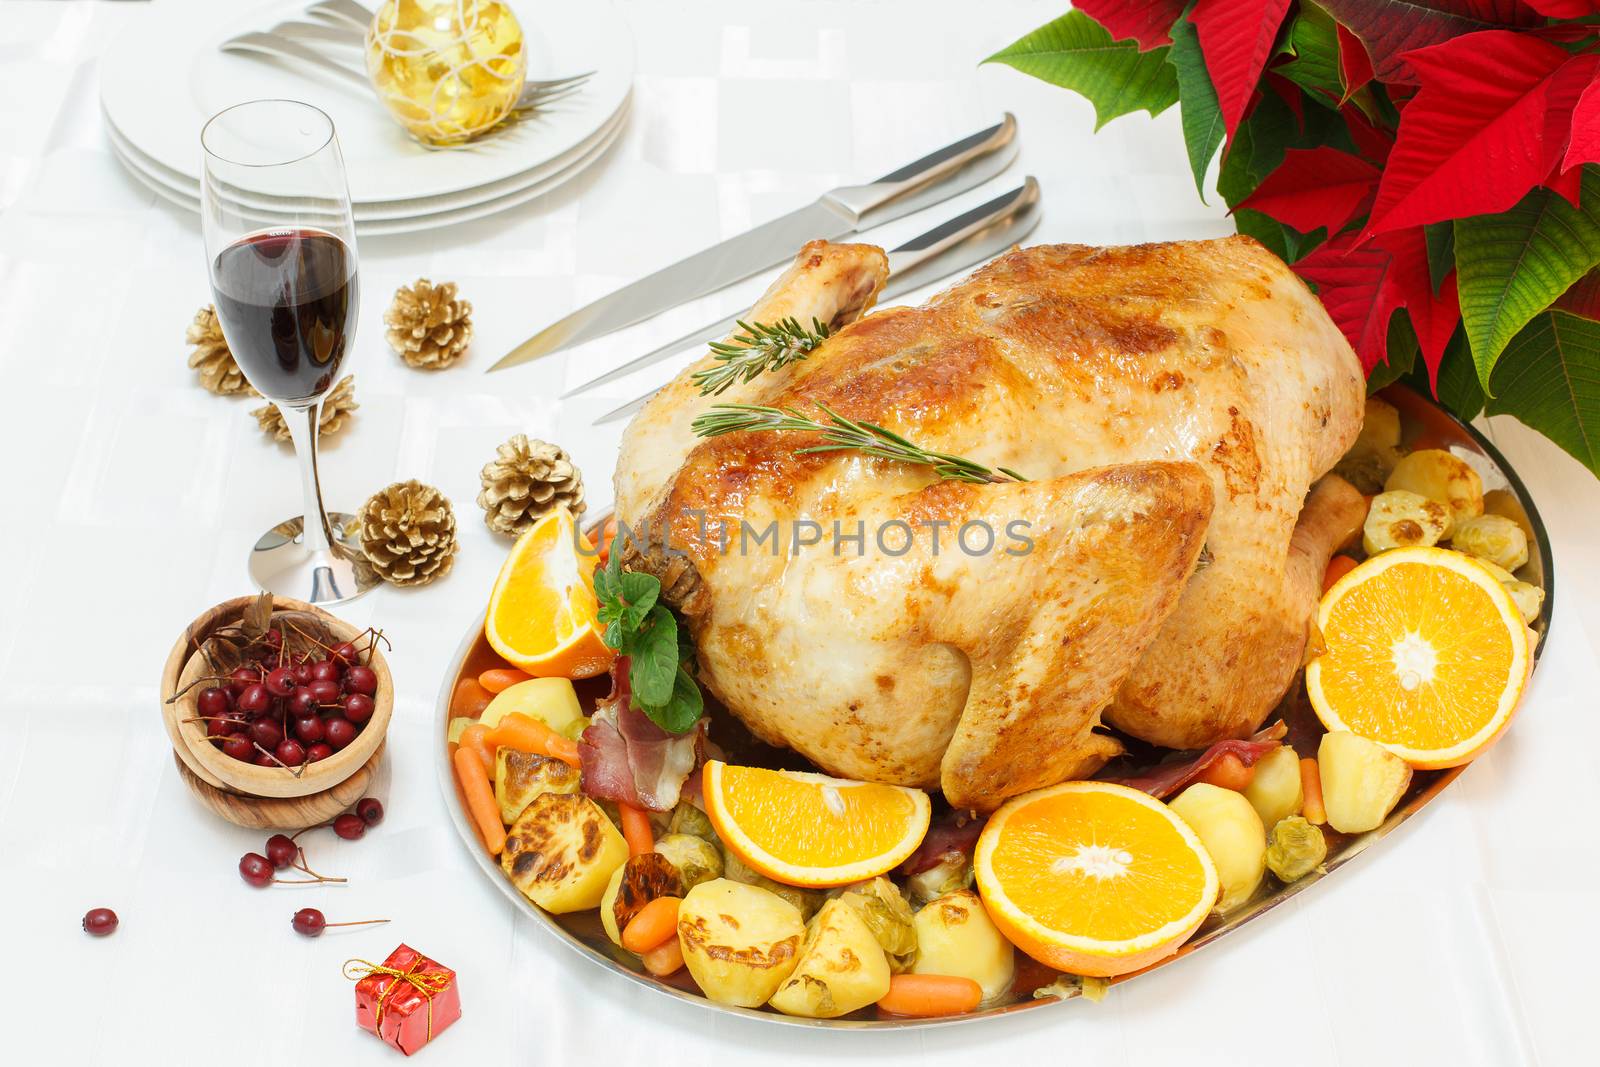 A festive roasted turkey on a platter with an assortment of vegetables, fruit and spices